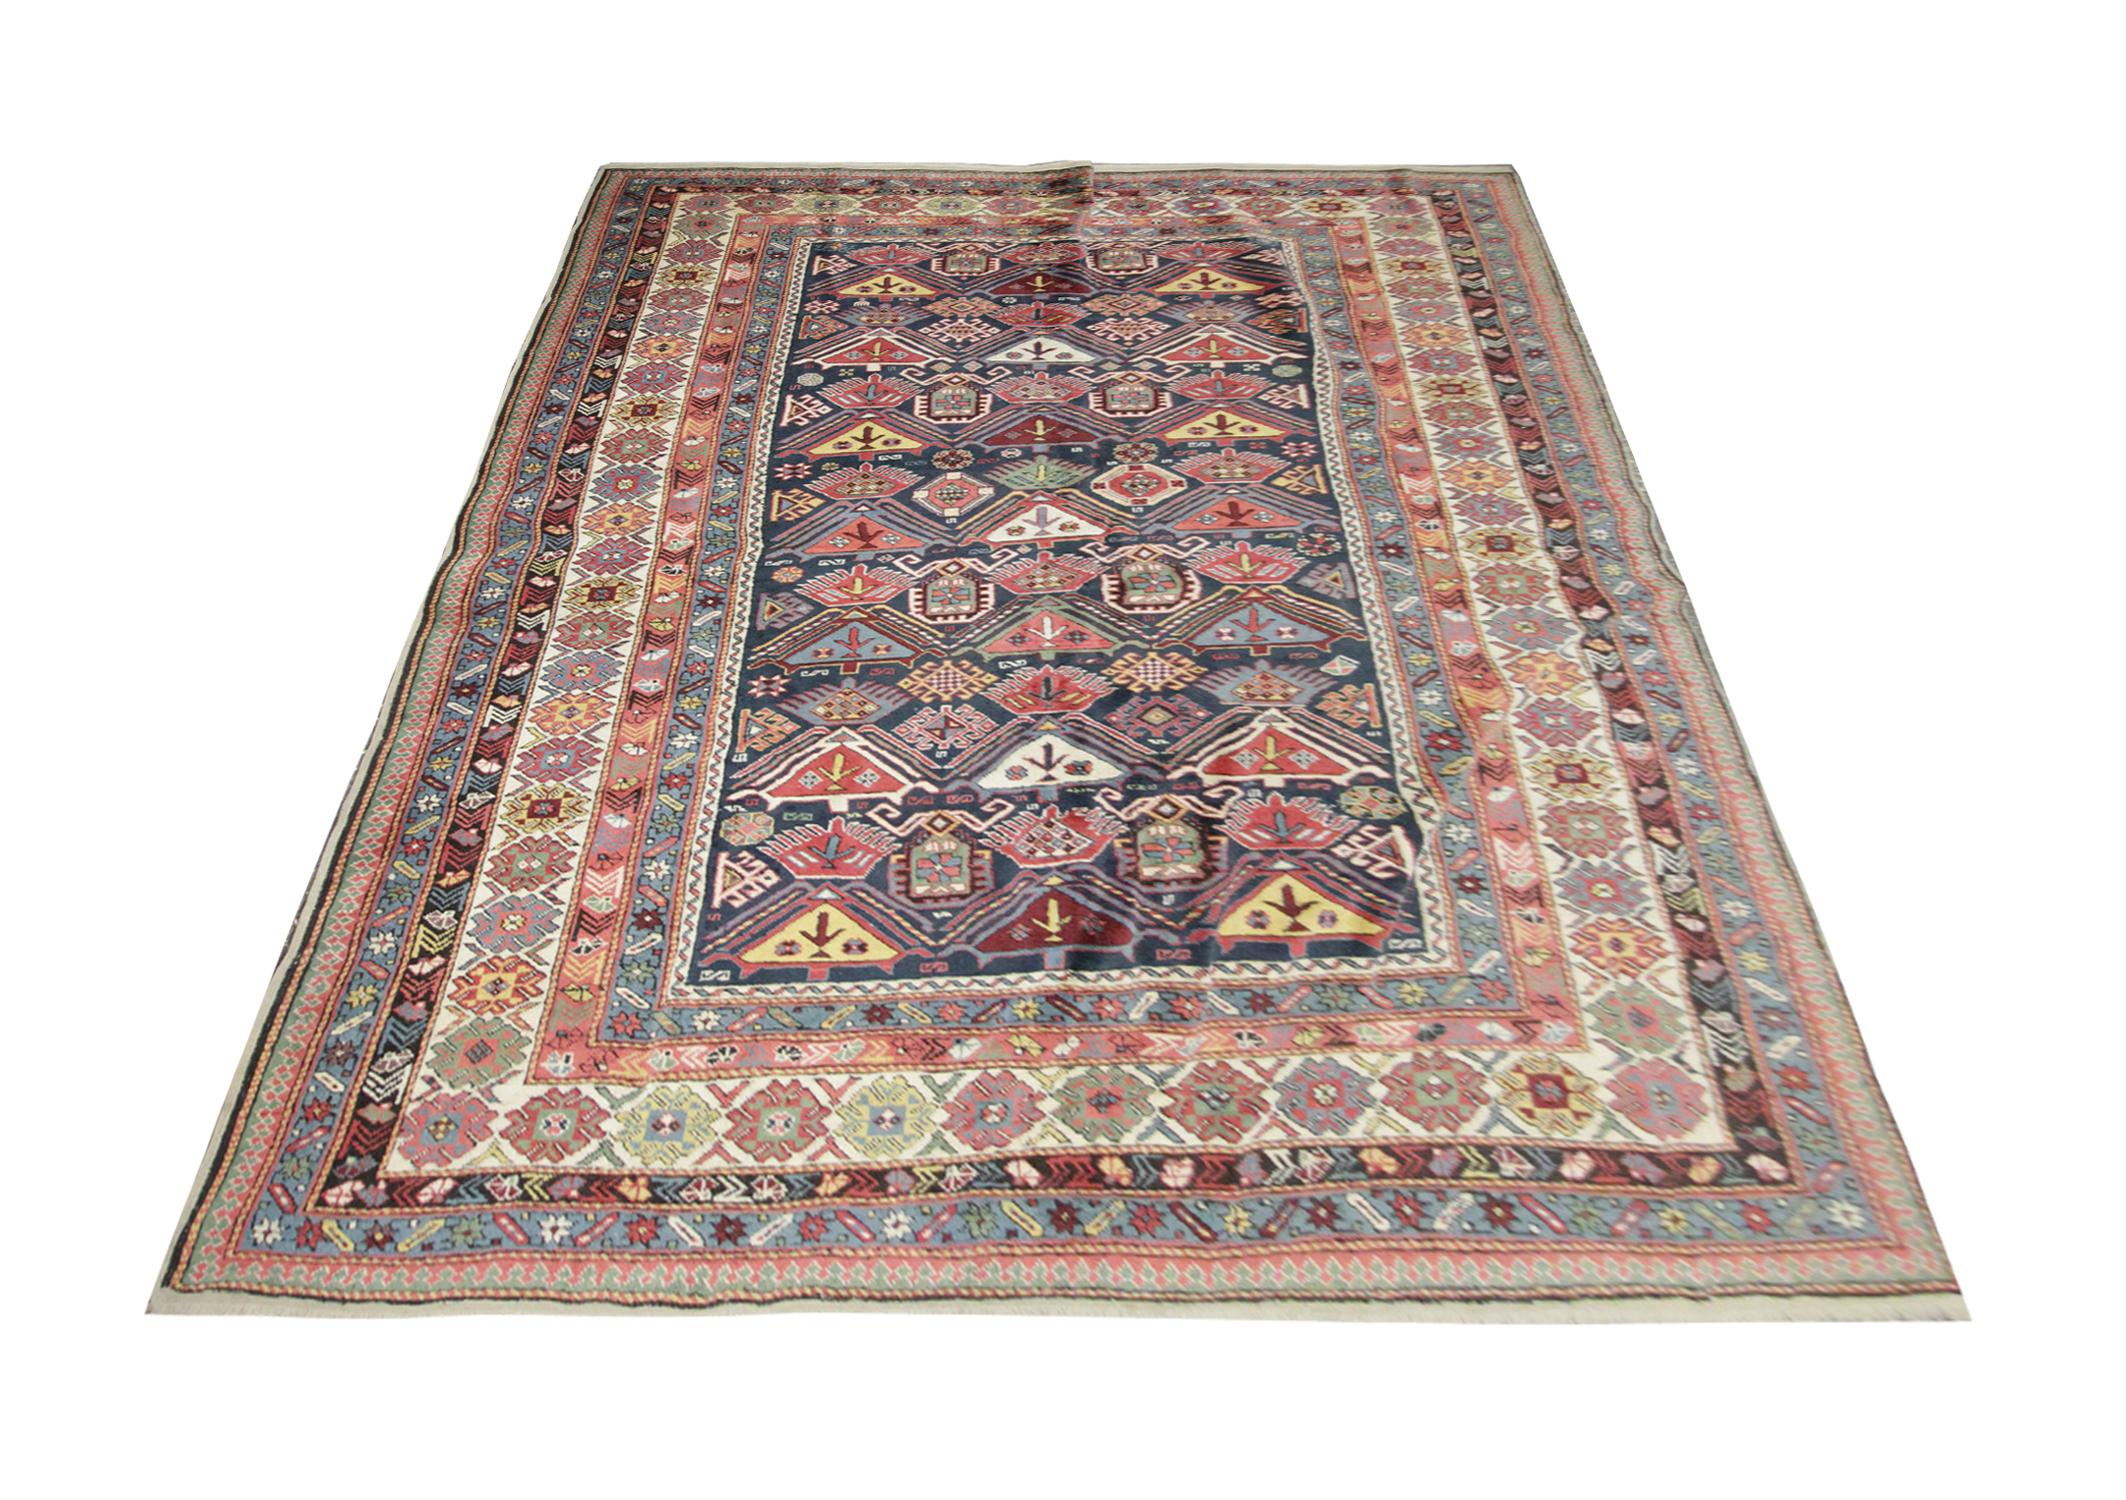 This oriental rug originates from Shirvan, Azerbaijan, it has been woven by hand with handspun wool which has been dyed with 100% organic vegetable dyes. With a multi-layered border and a symmetrical pattern, this rug will truly Stand out against